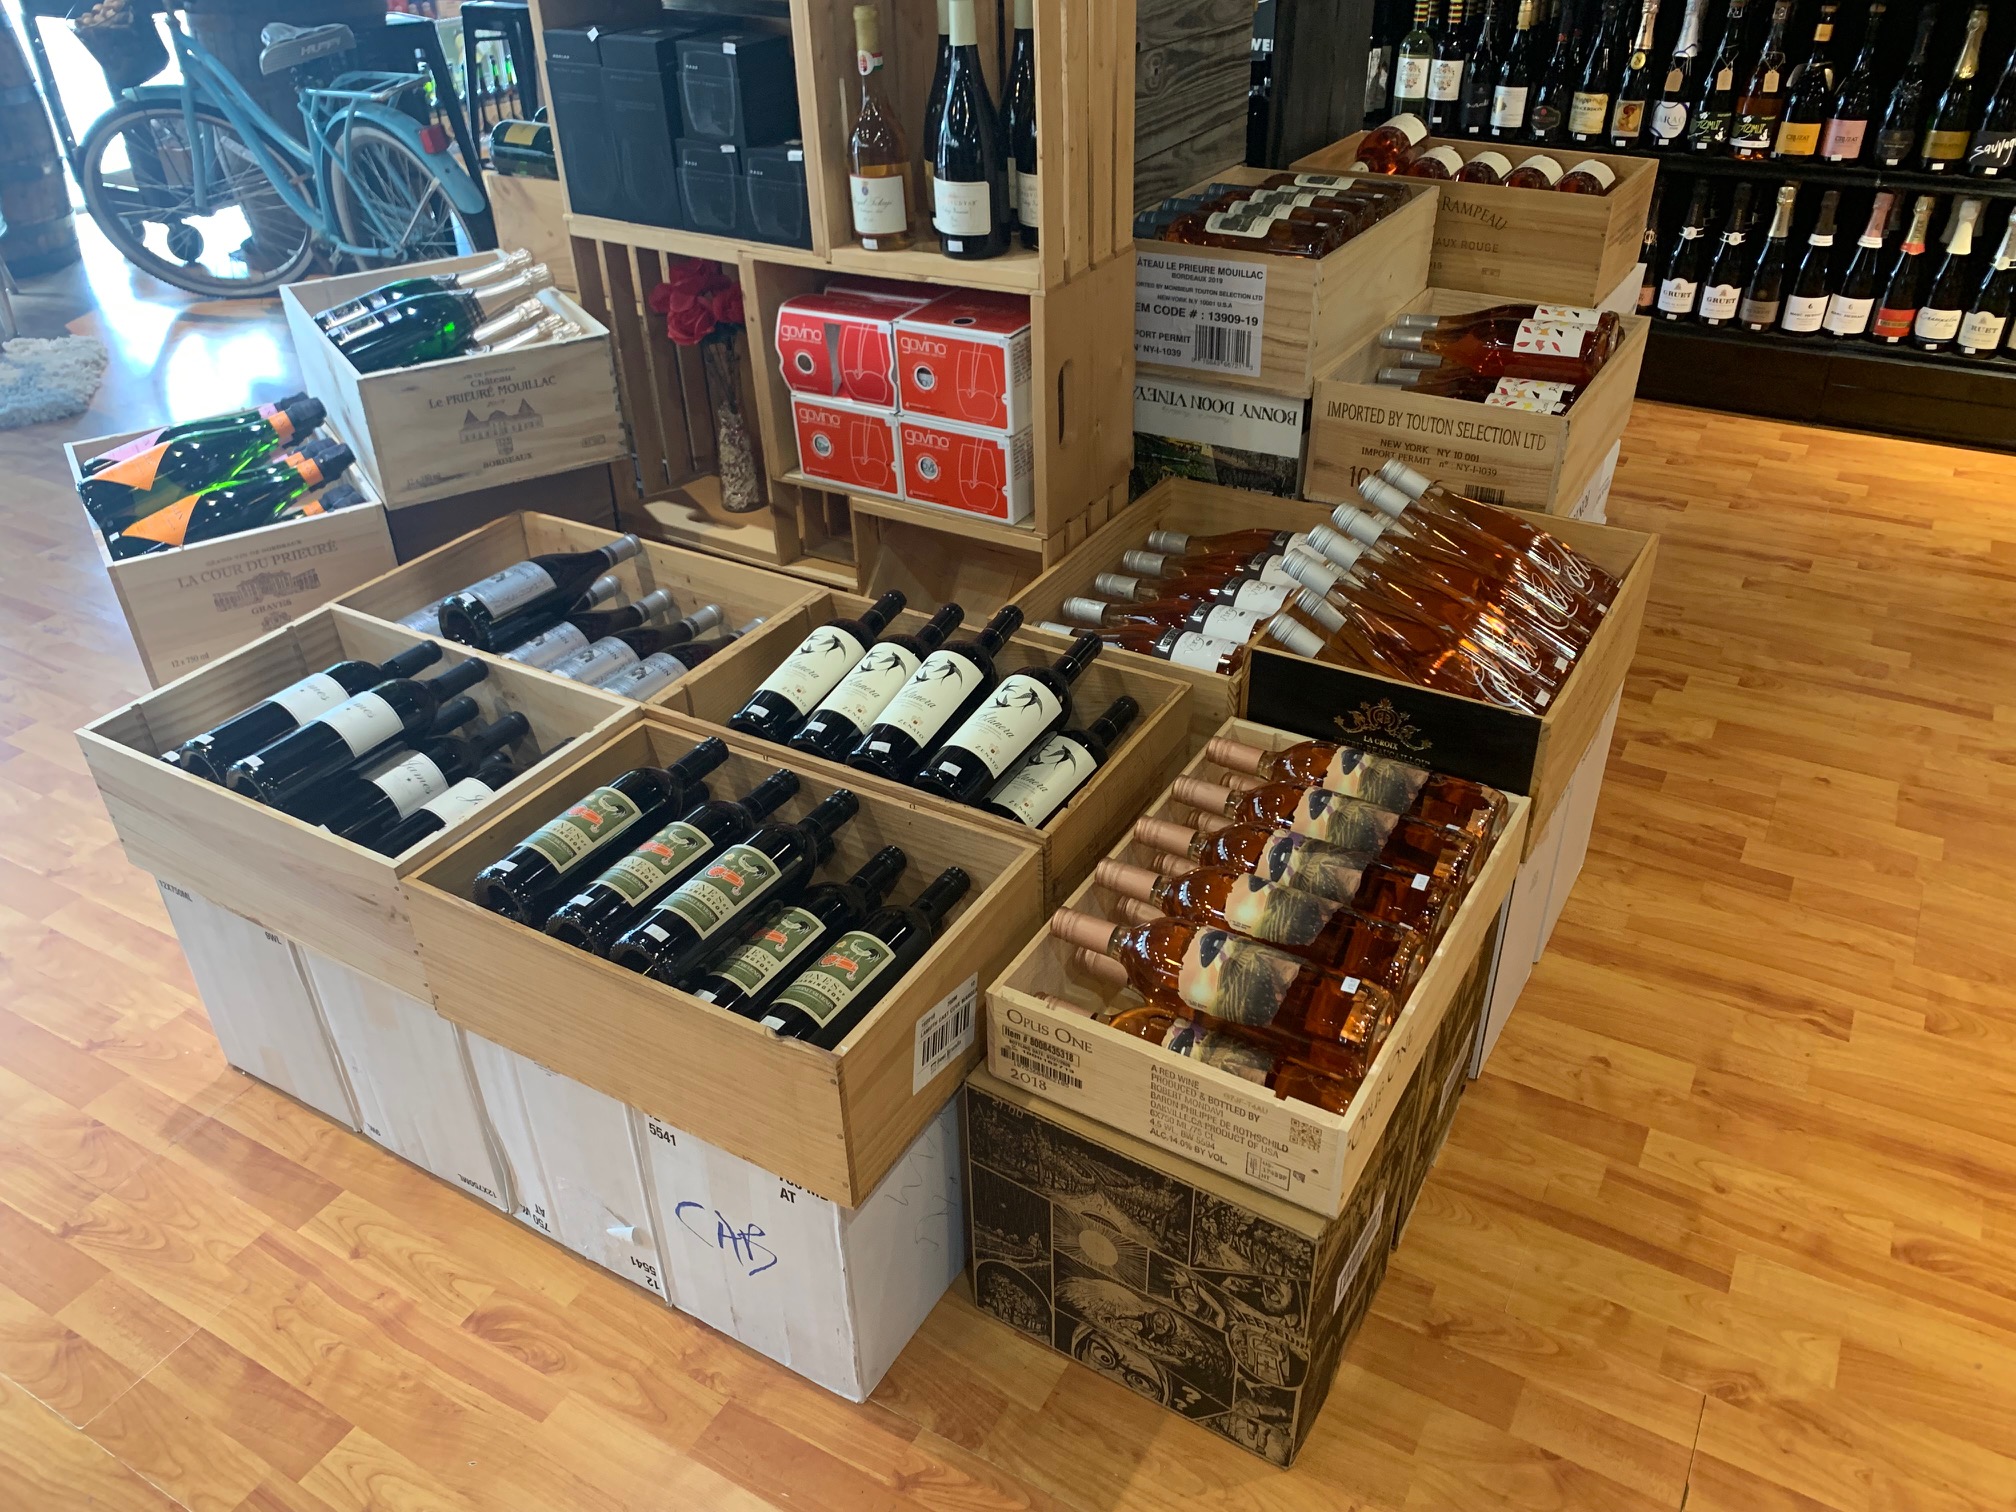 Crates of wine bottles inside a store